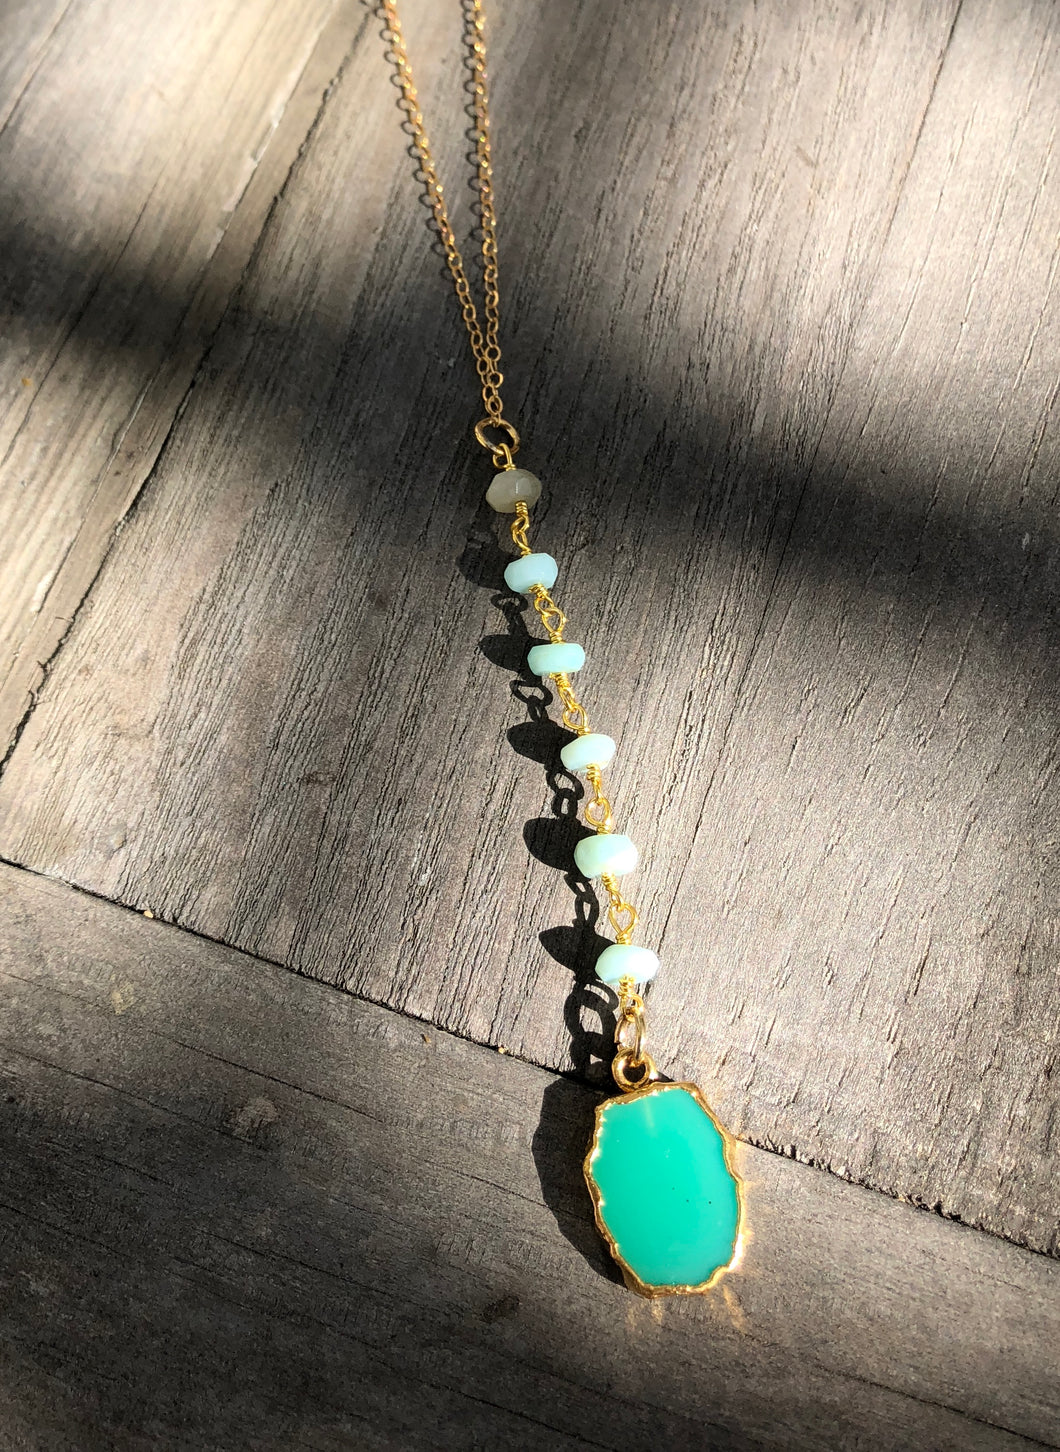 Y necklace 16 inches around the neck with chrysoprase beads and pendant